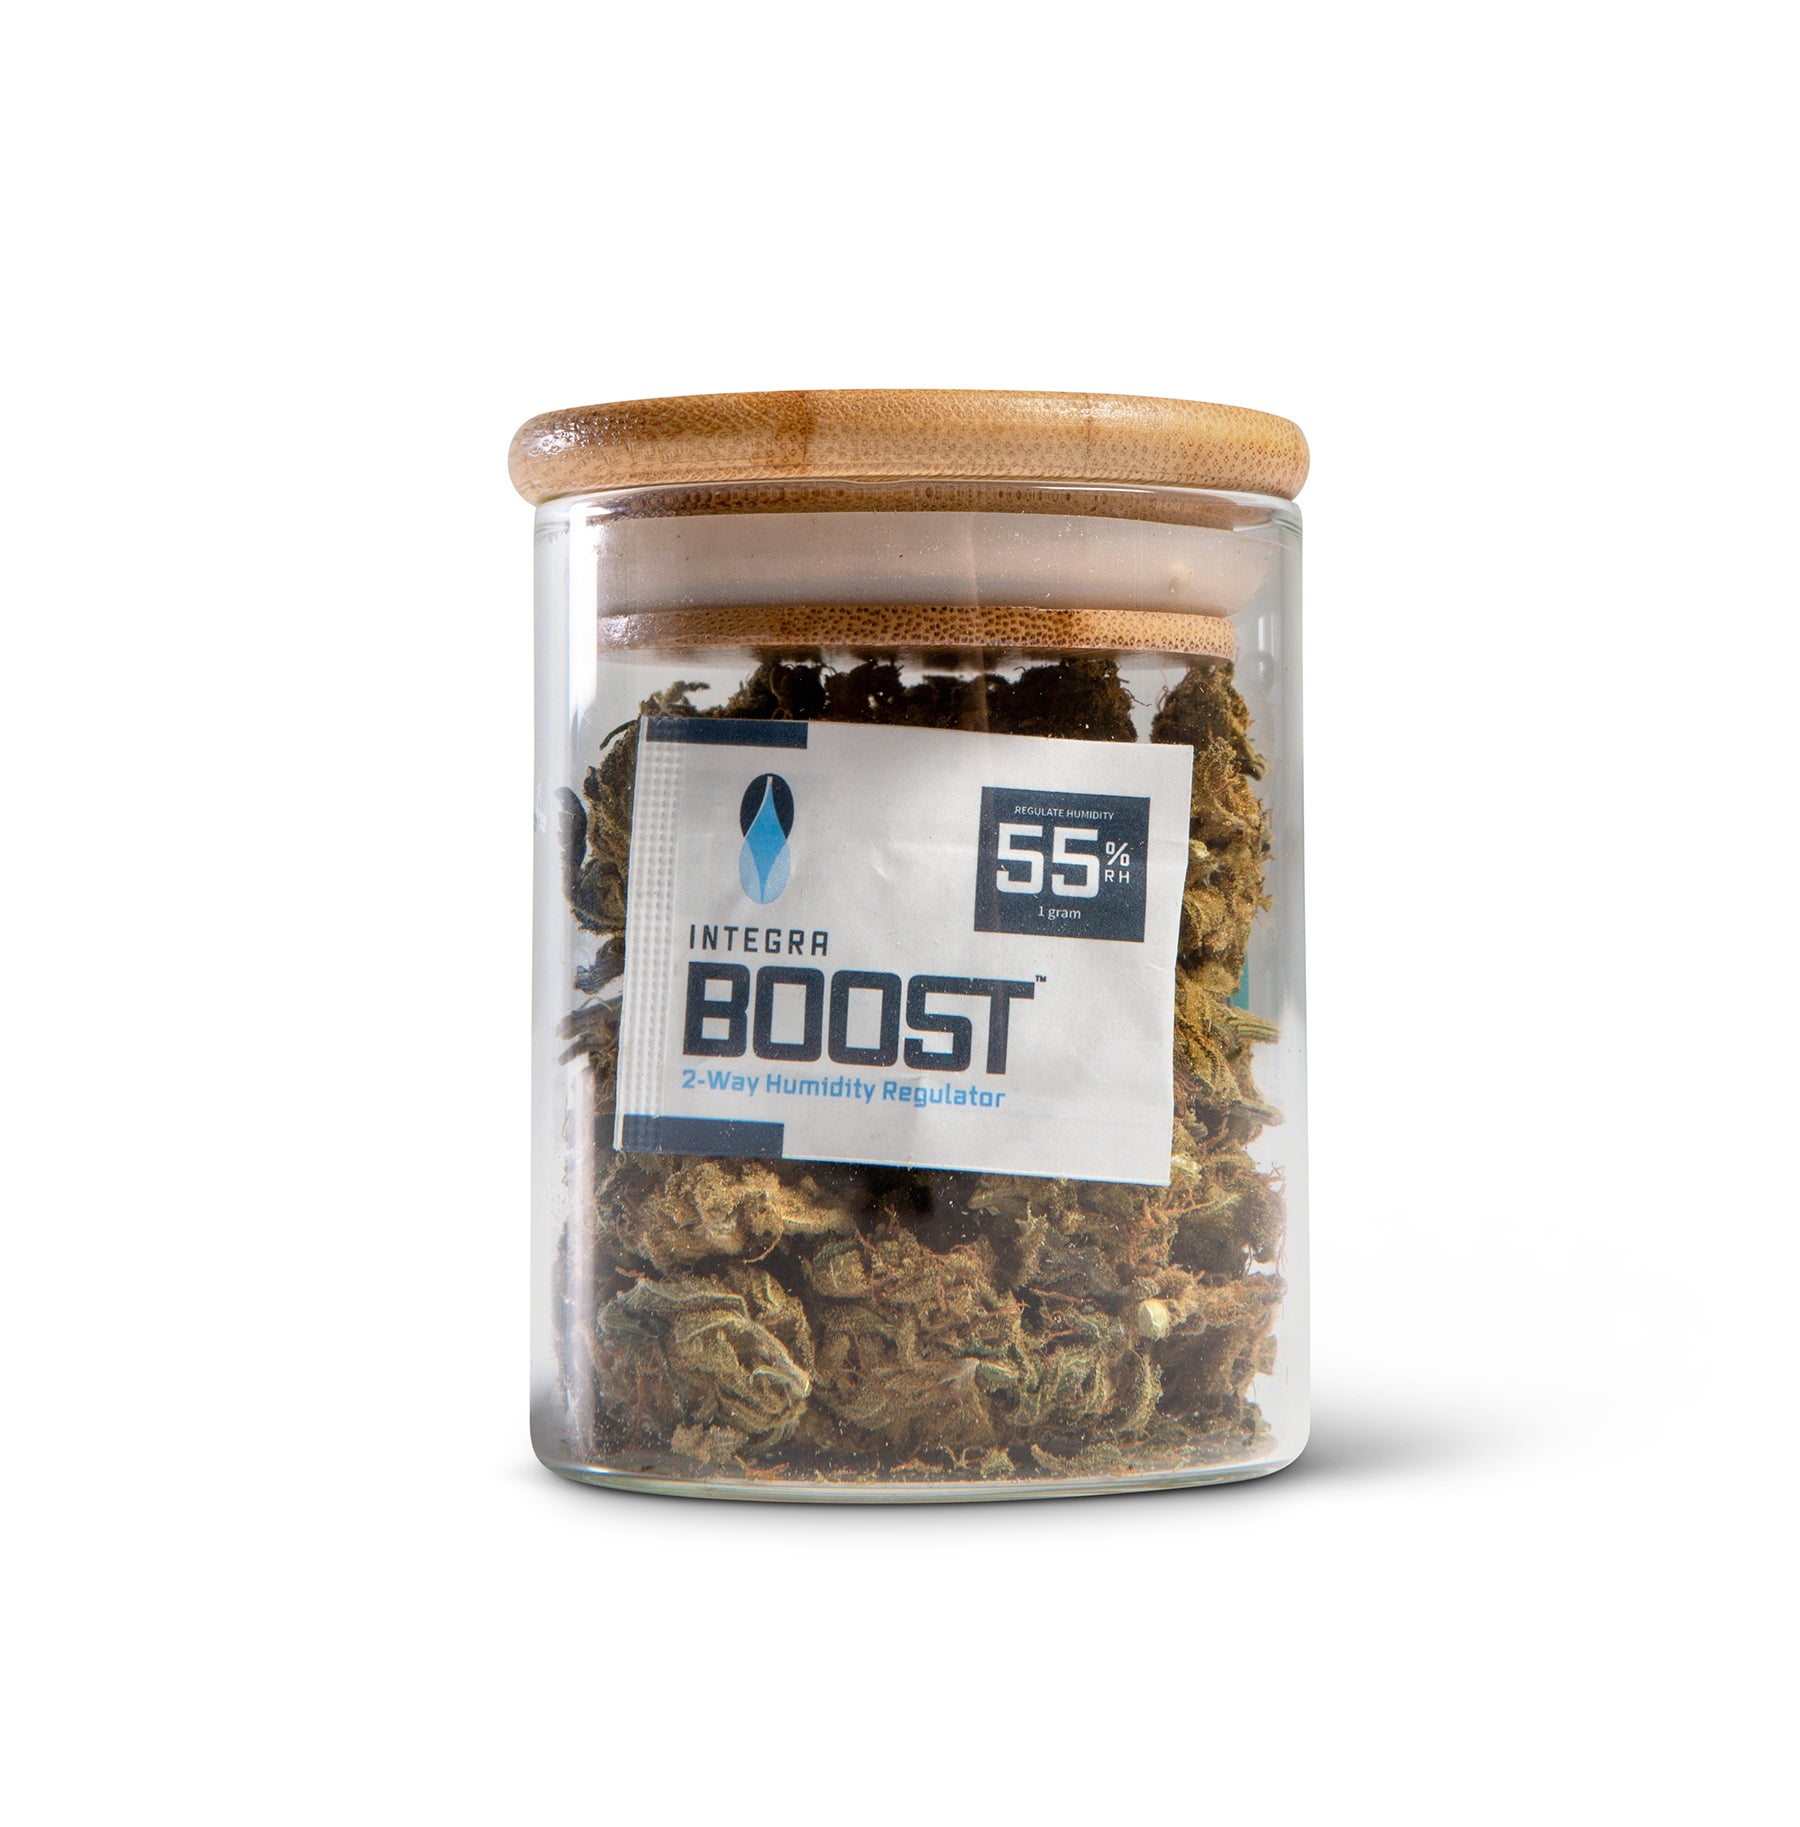 55% Integra Boost Humidity Control Packs - 4 Gram Size - 600 Count